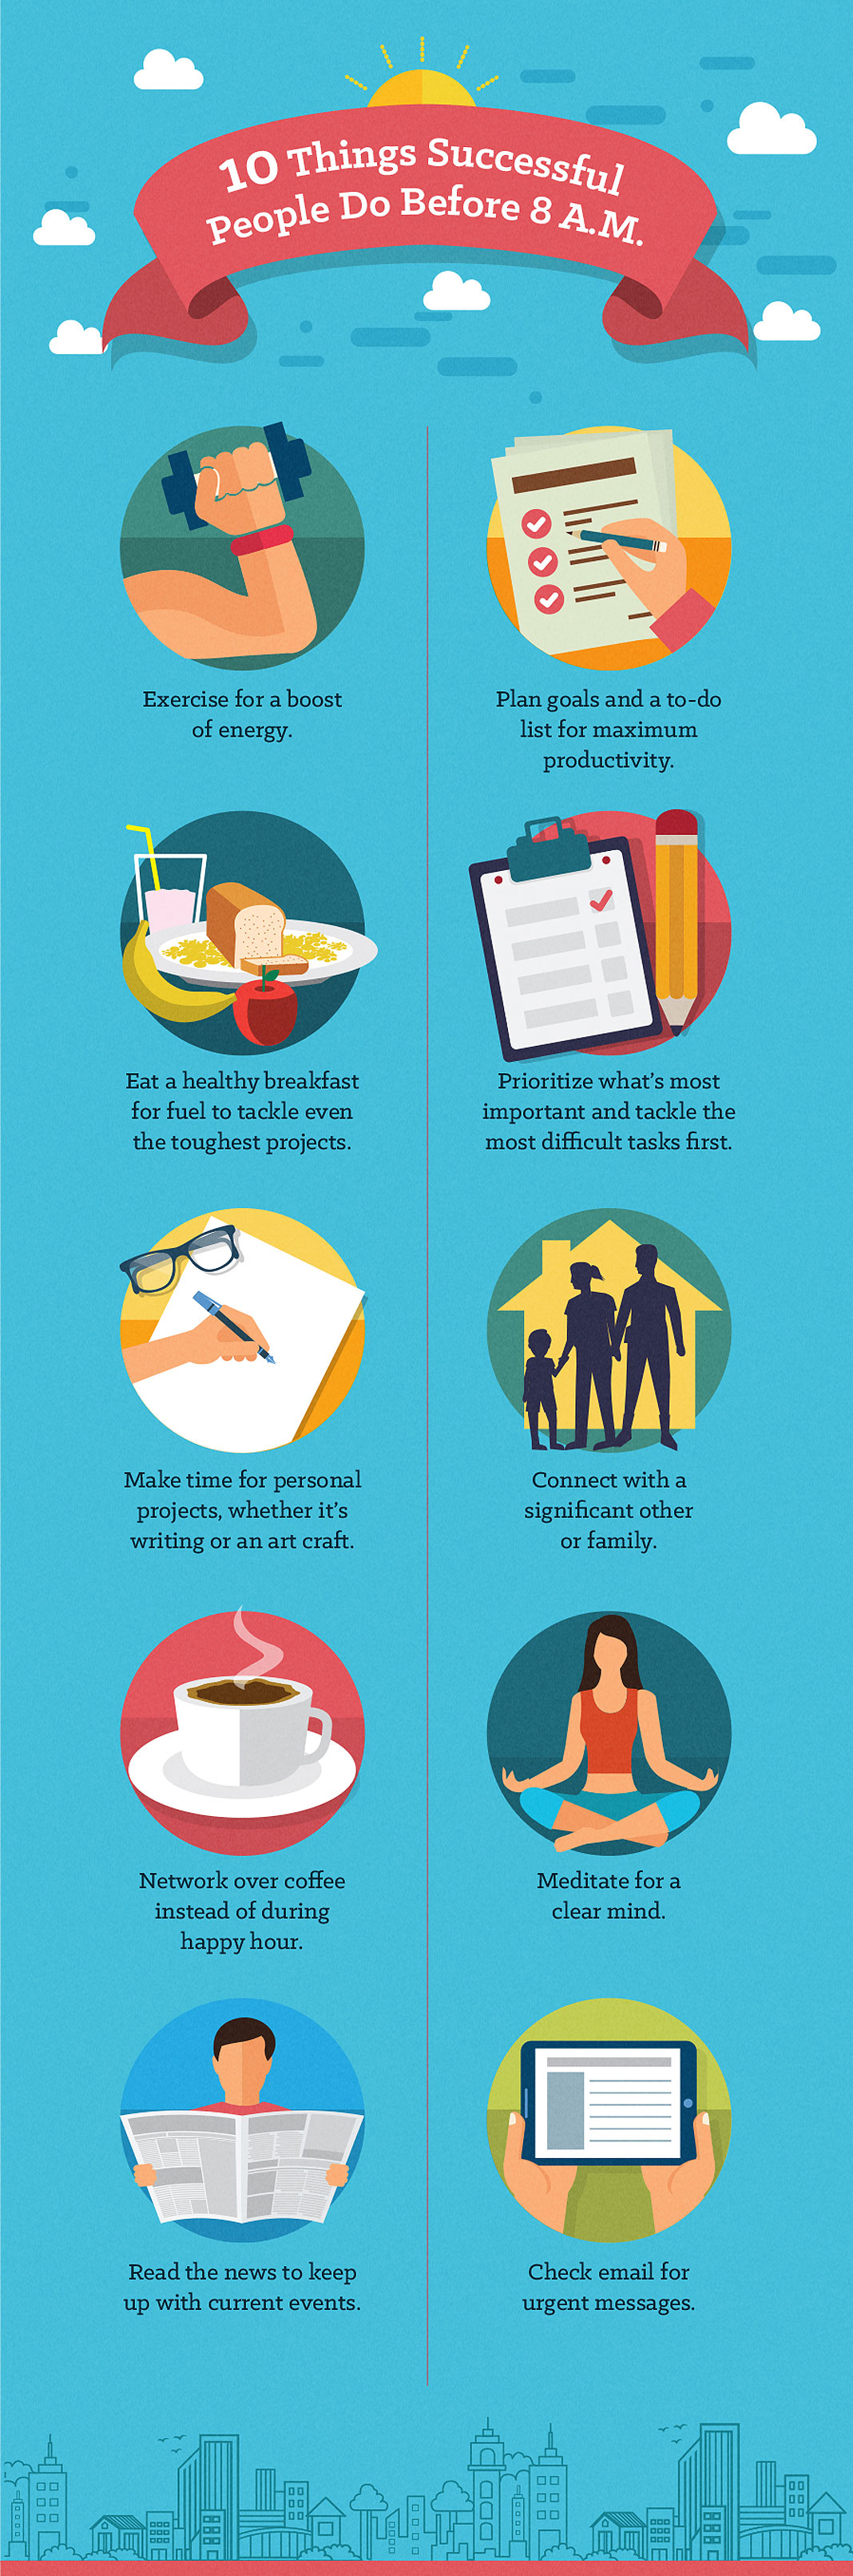 10 Things Successful People Do In the Morning